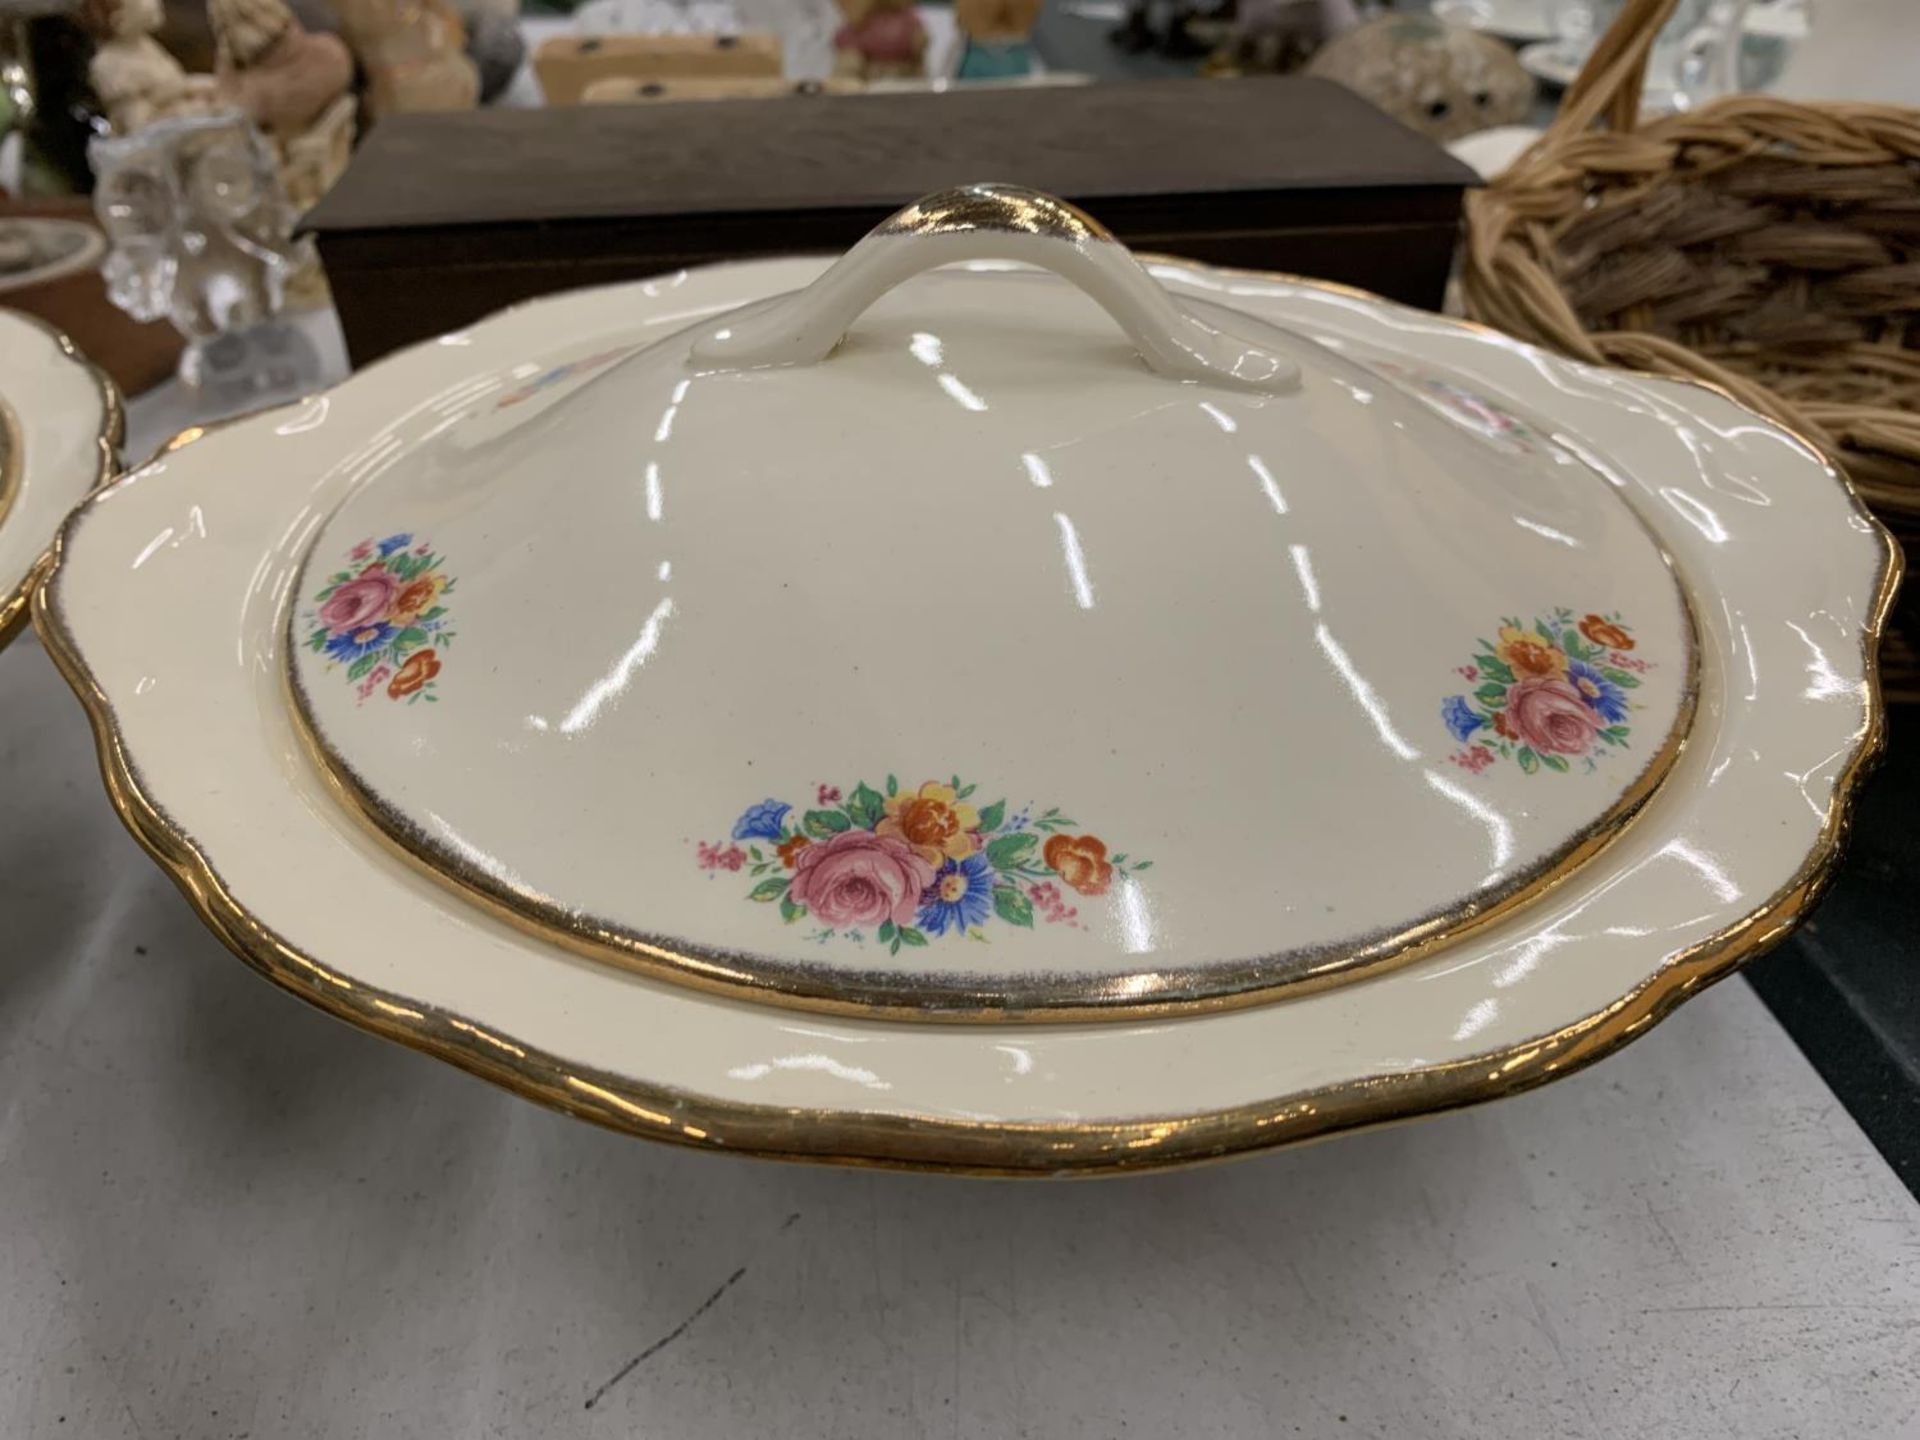 A QUANTITY OF VINTAGE GRINDLEY 'CREAM PETAL DINNERWARE TO INCLUDE SERVING TUREENS, VARIOUS SIZES - Image 2 of 4